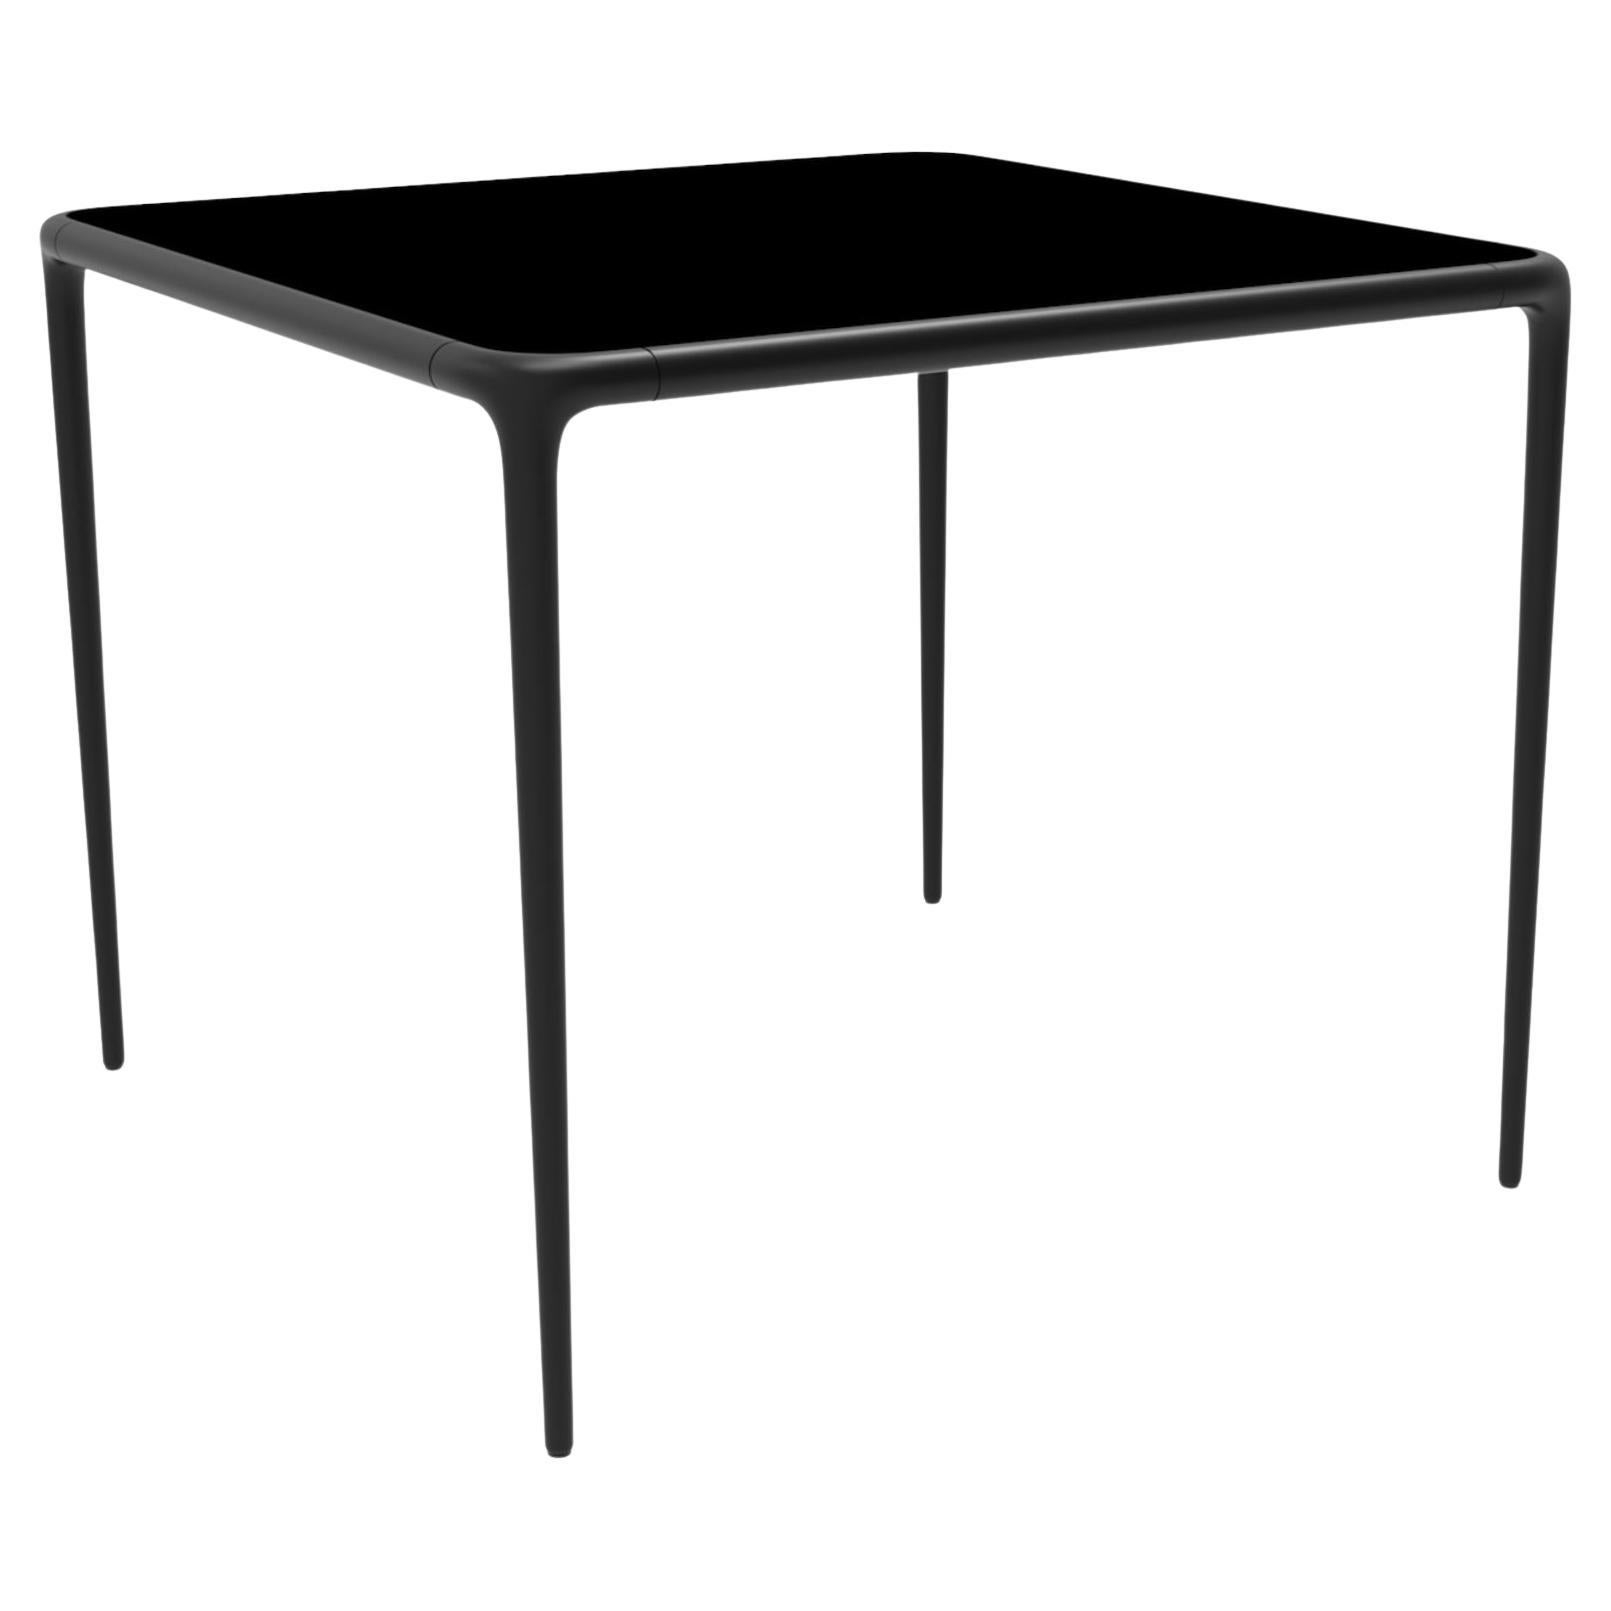 Xaloc Black Glass Top Table 90 by Mowee For Sale